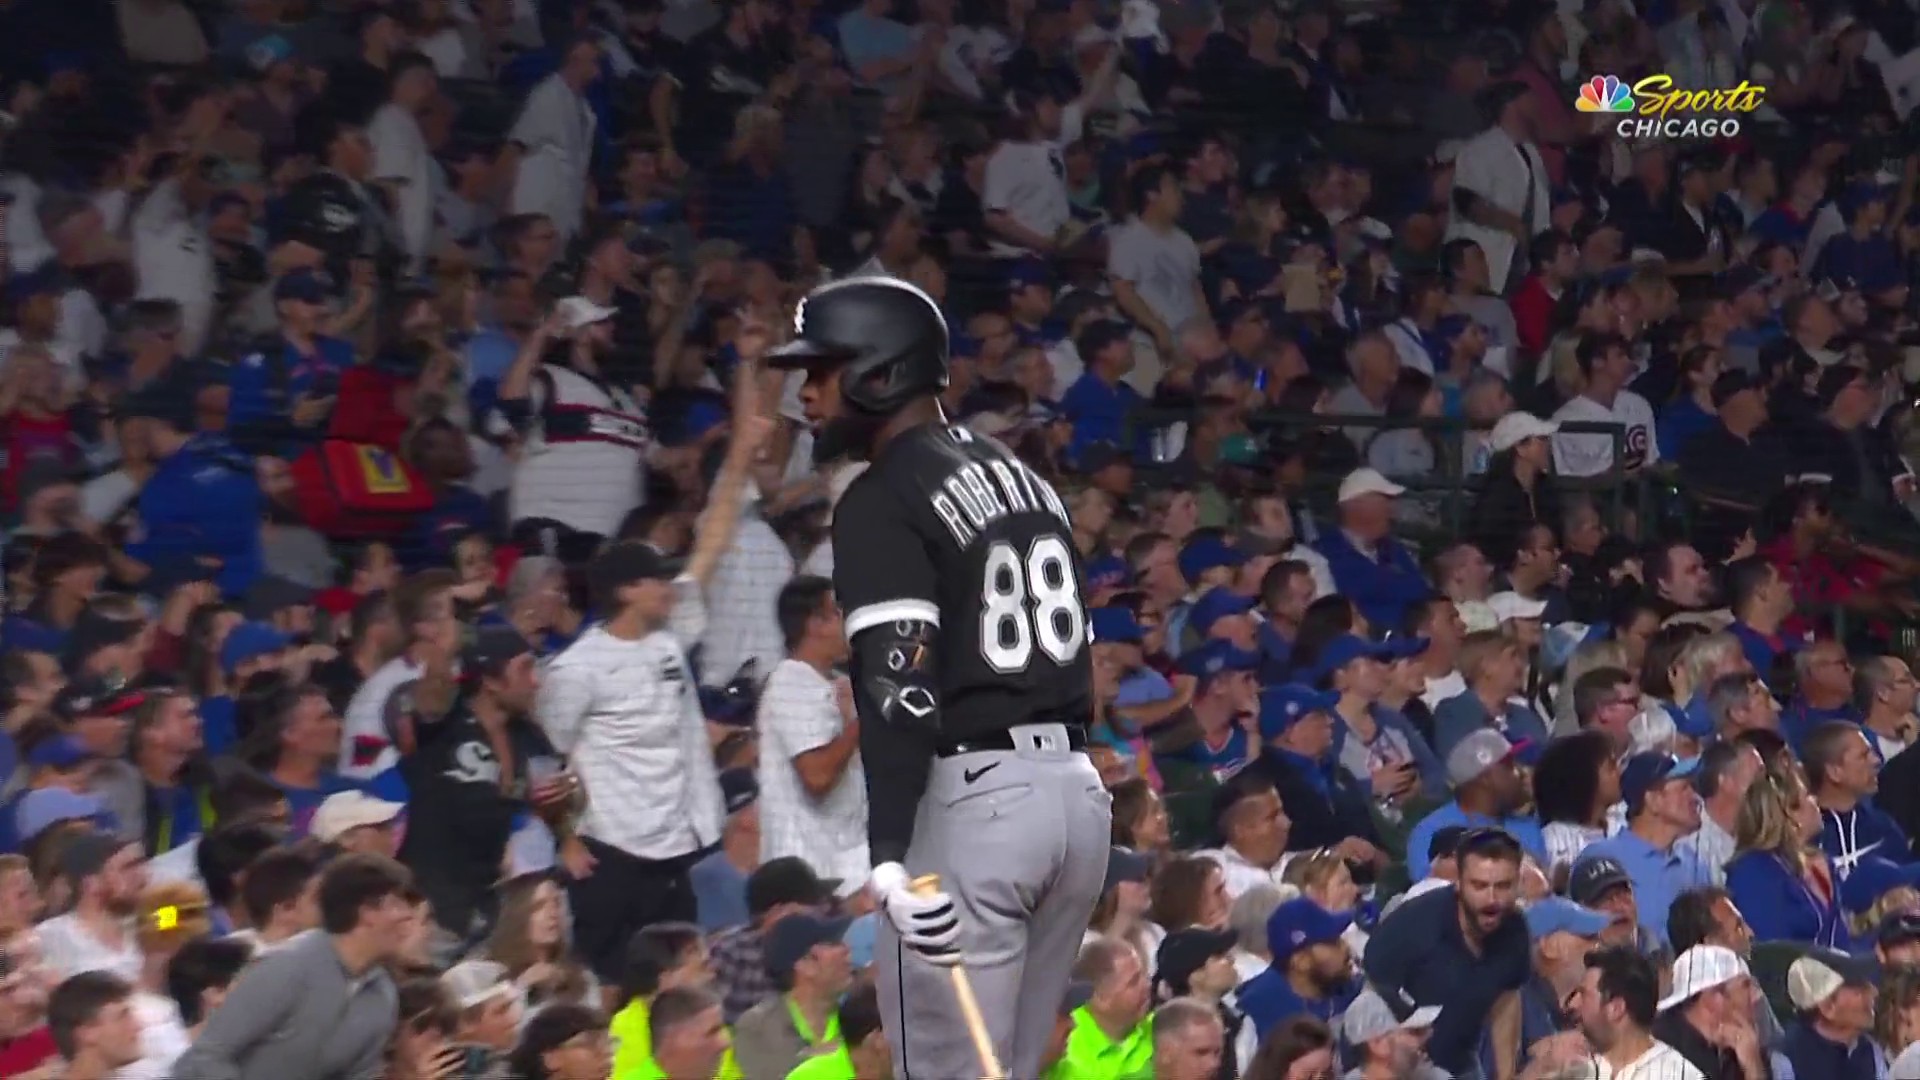 Luis Robert Jr. #88 of the Chicago White Sox runs back to the